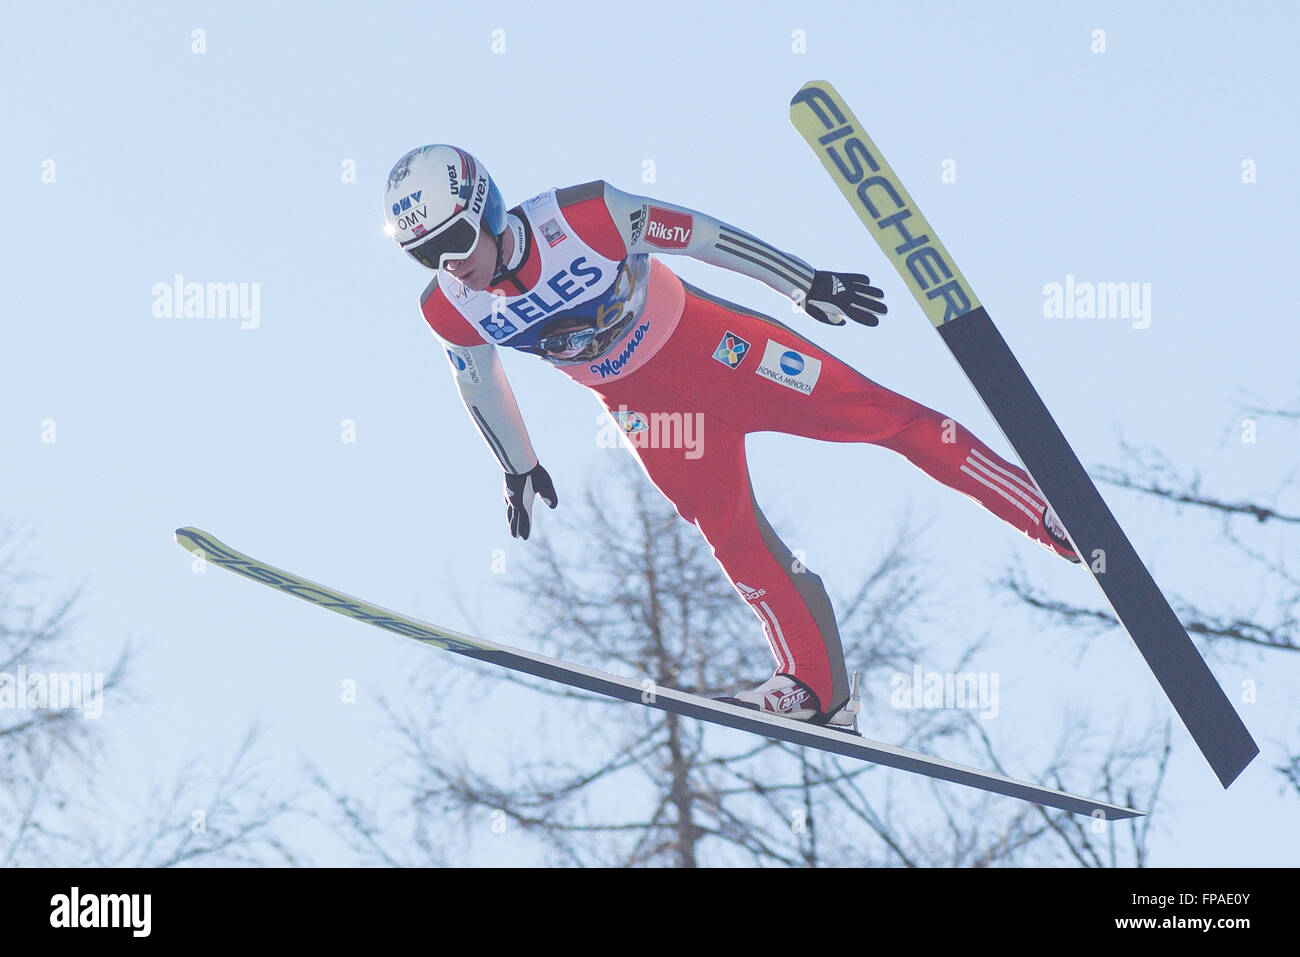 Planica, Slovenia. 18th Mar, 2016. Kenneth Gangnes of Norway competes during Planica FIS Ski Jumping World Cup final on the March 18, 2016 in Planica, Slovenia. © Rok Rakun/Pacific Press/Alamy Live News Stock Photo